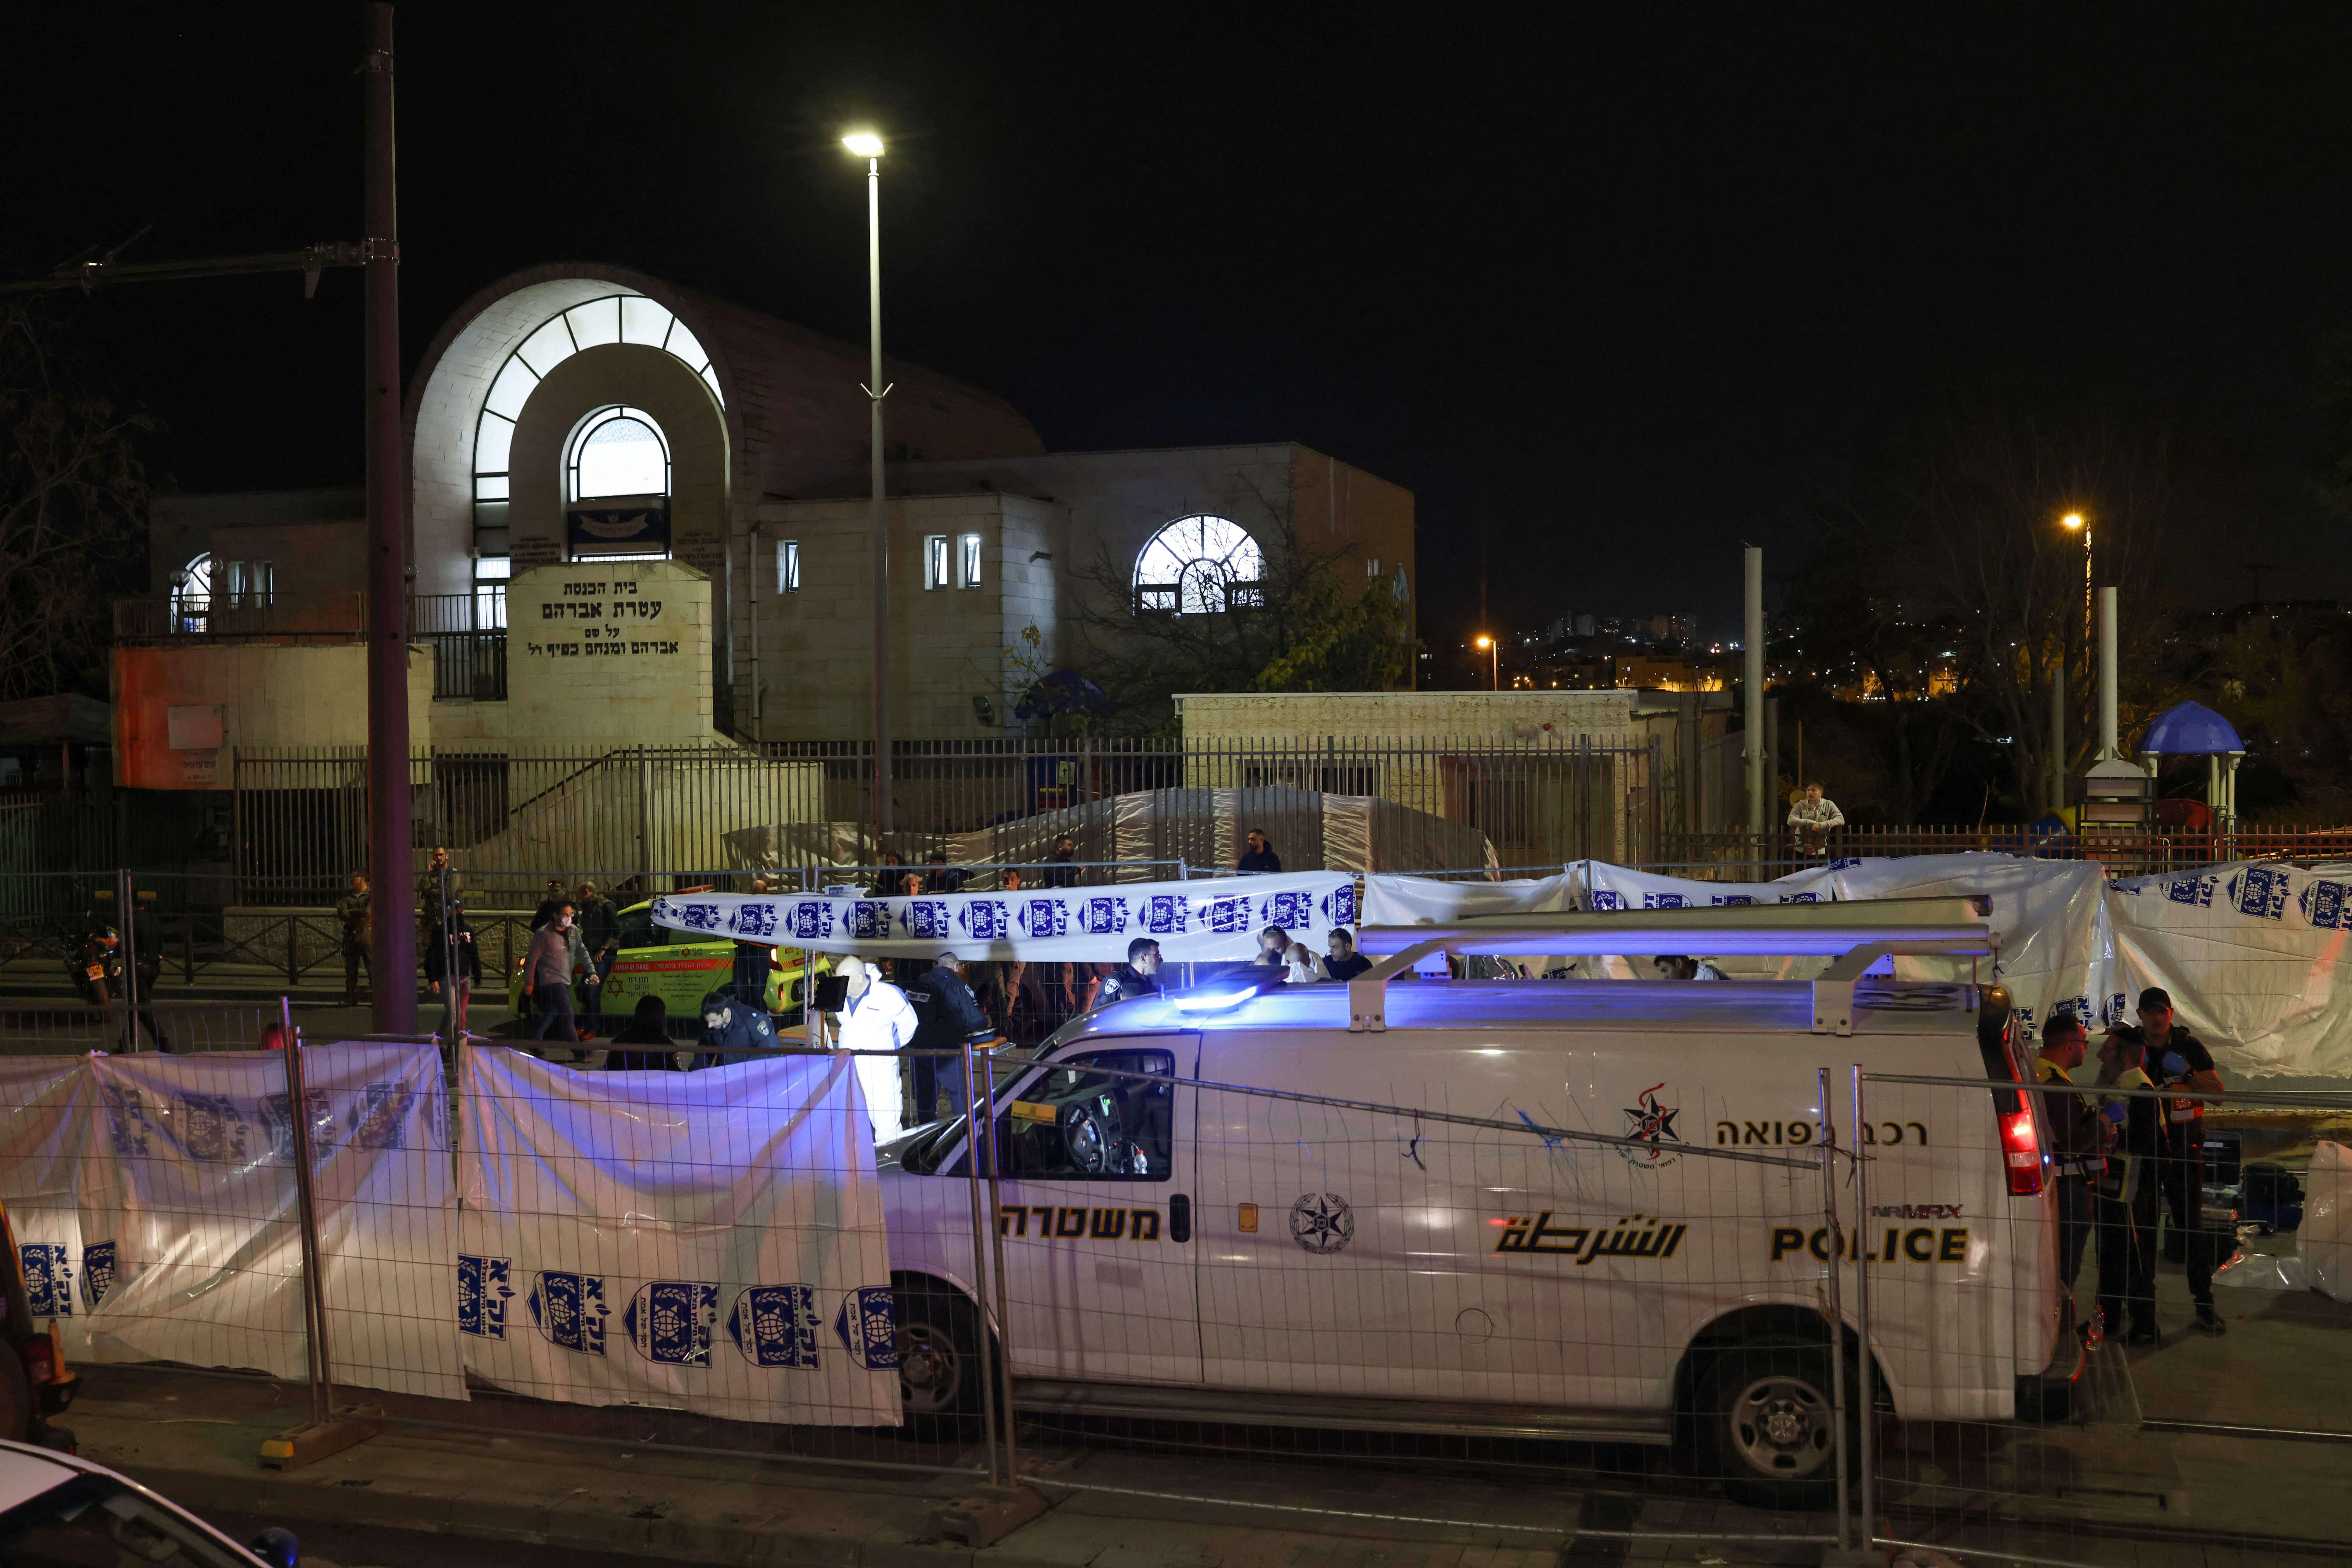 The East Jerusalem synagogue attack broke my heart. Now, Israelis must remember our diversity is our strength